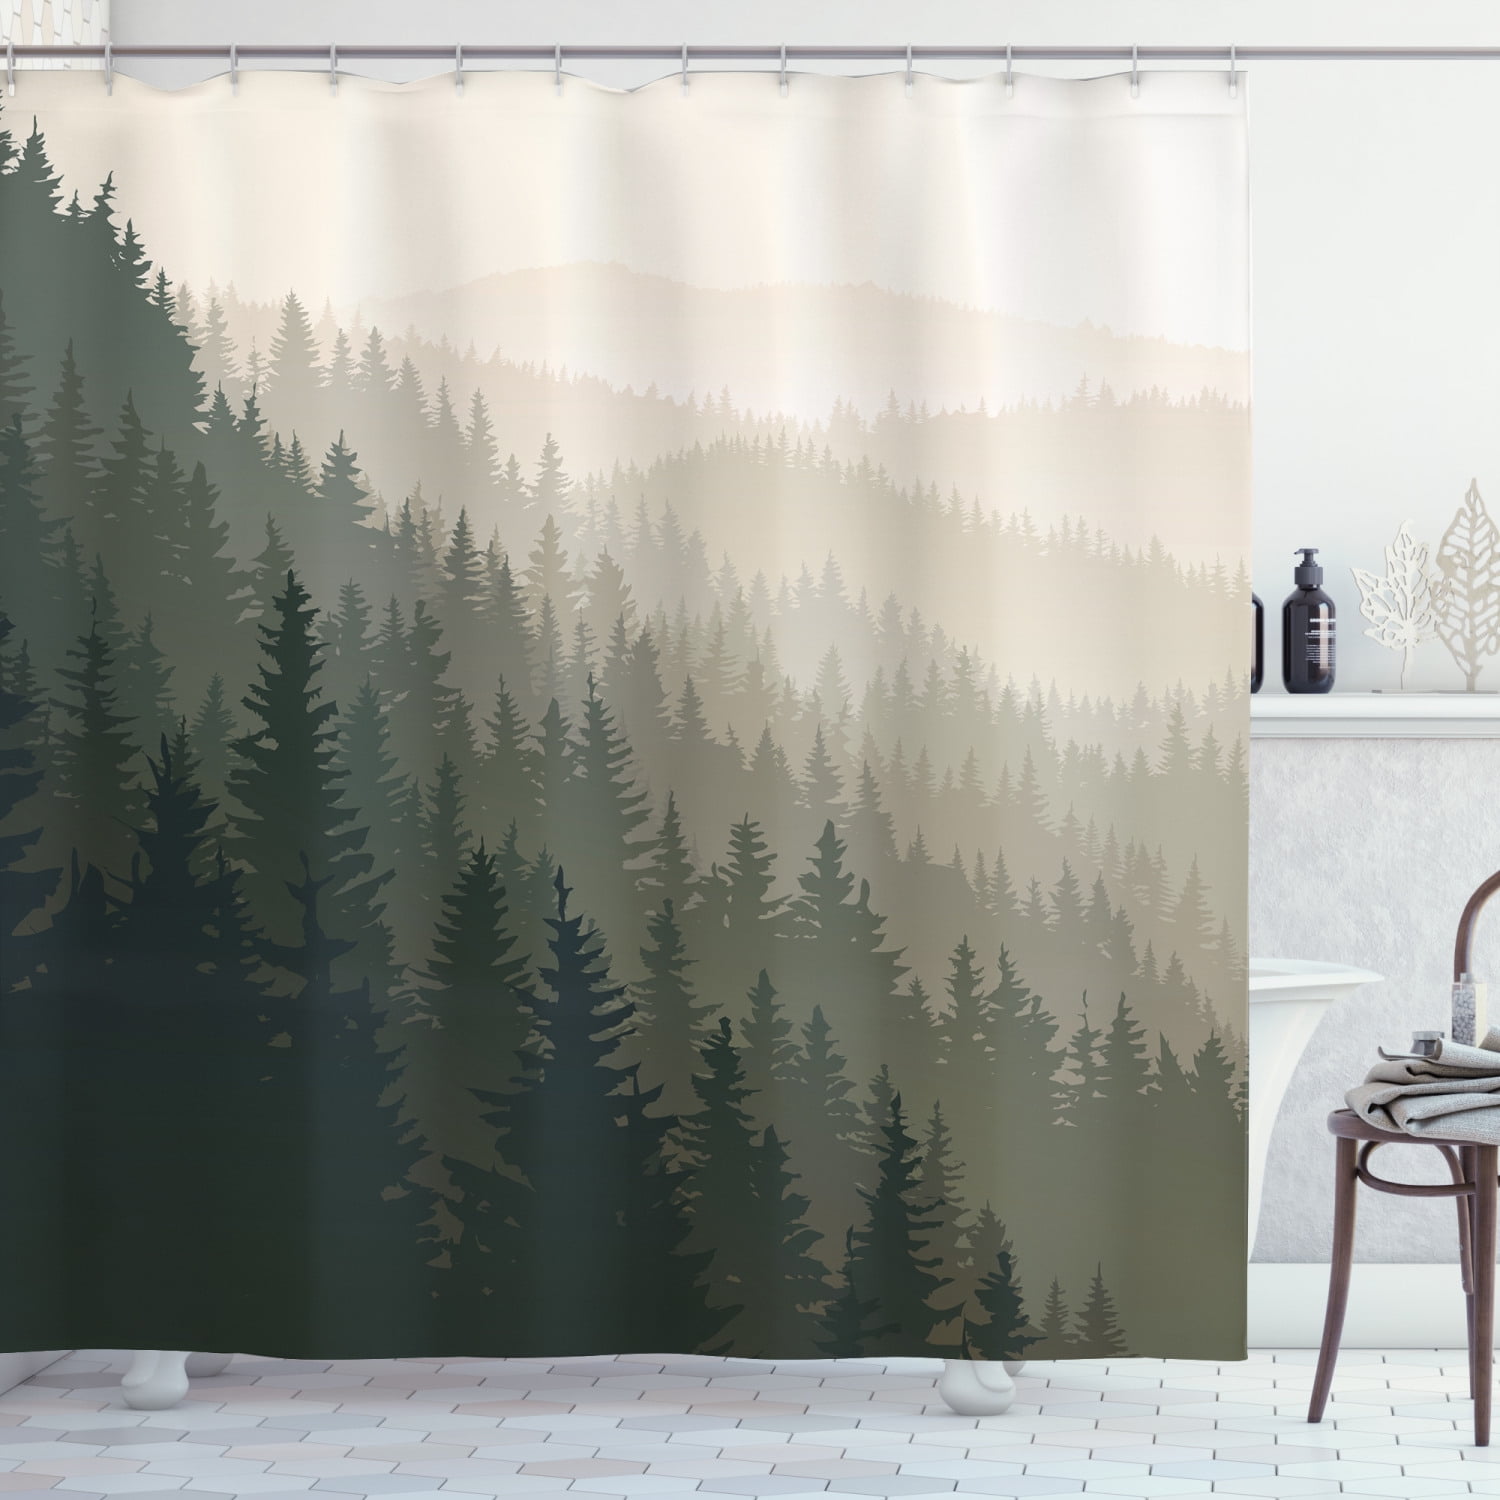 Elk in Dreamy Misty Forest Trees Fabric Shower Curtain Extra Long 72*84 Inches 